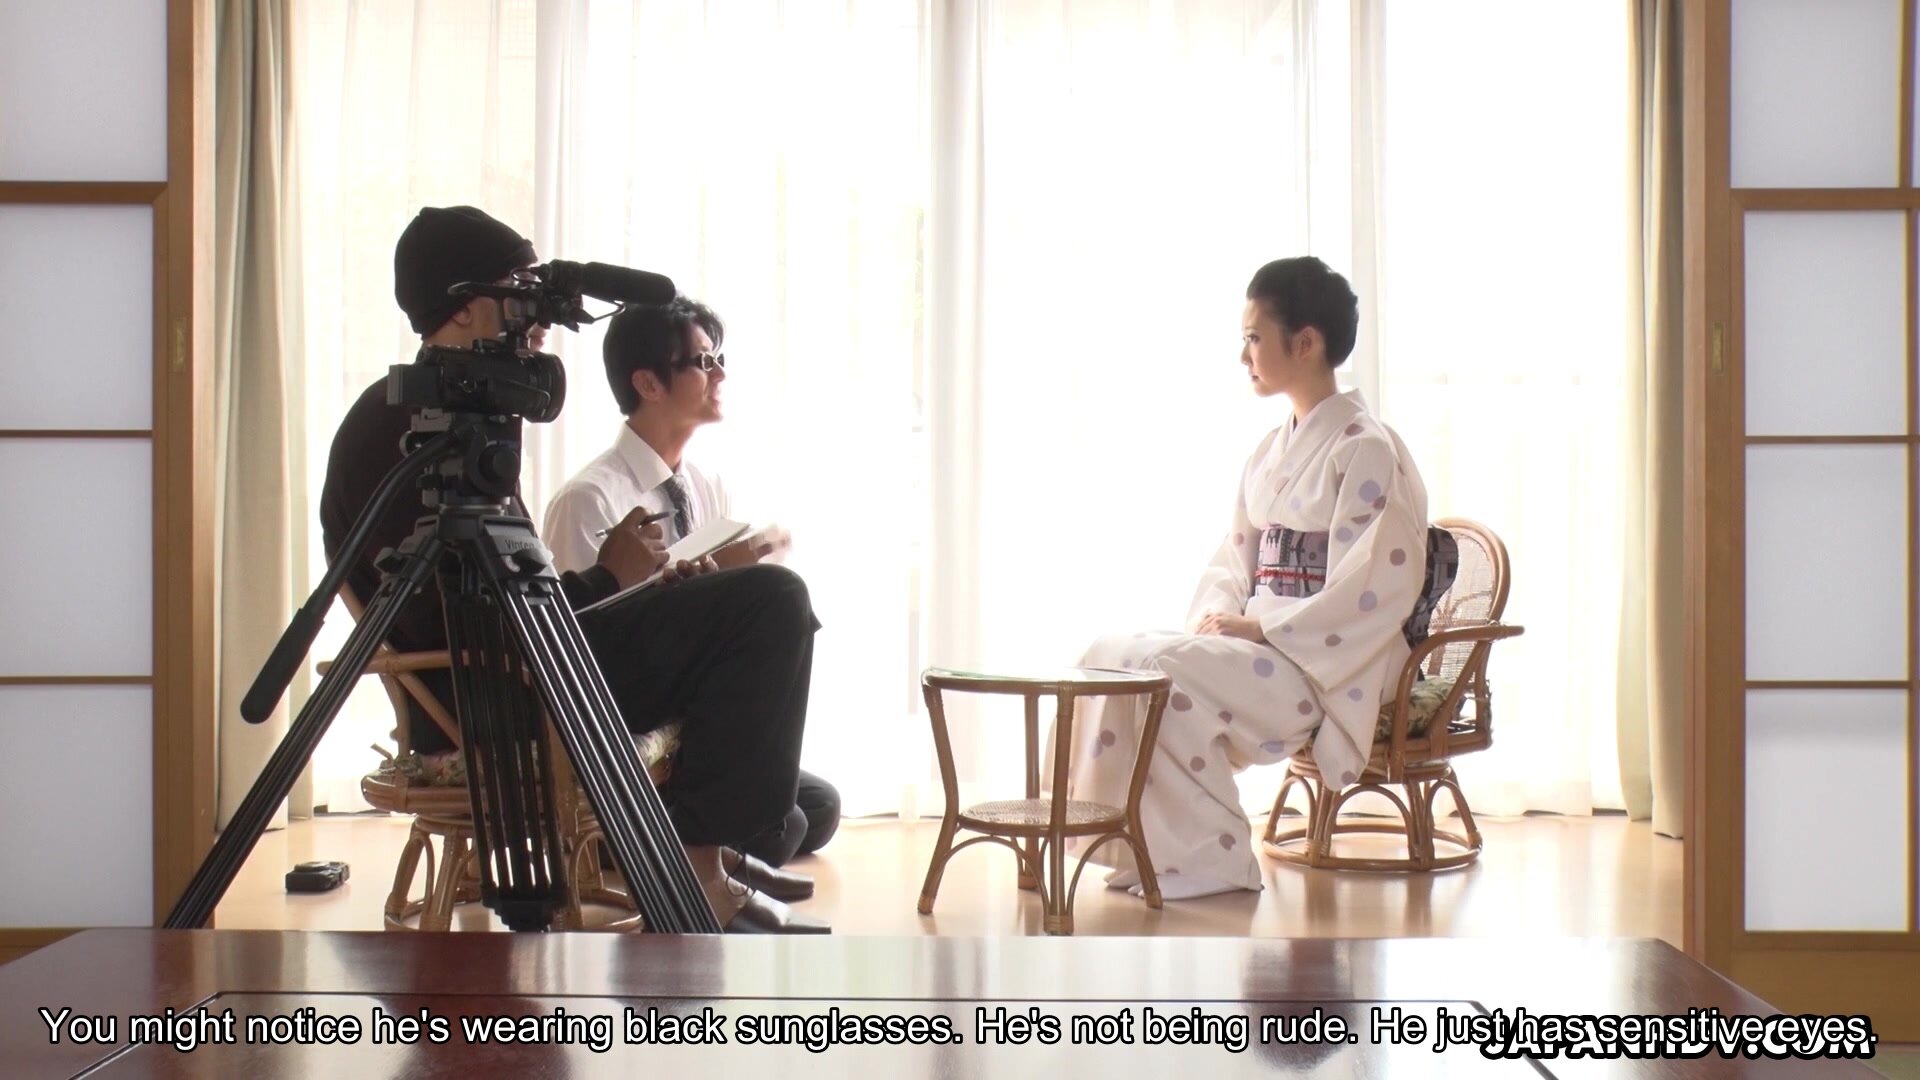 Yui Watanabe is interviewed by a black man today in her kimono